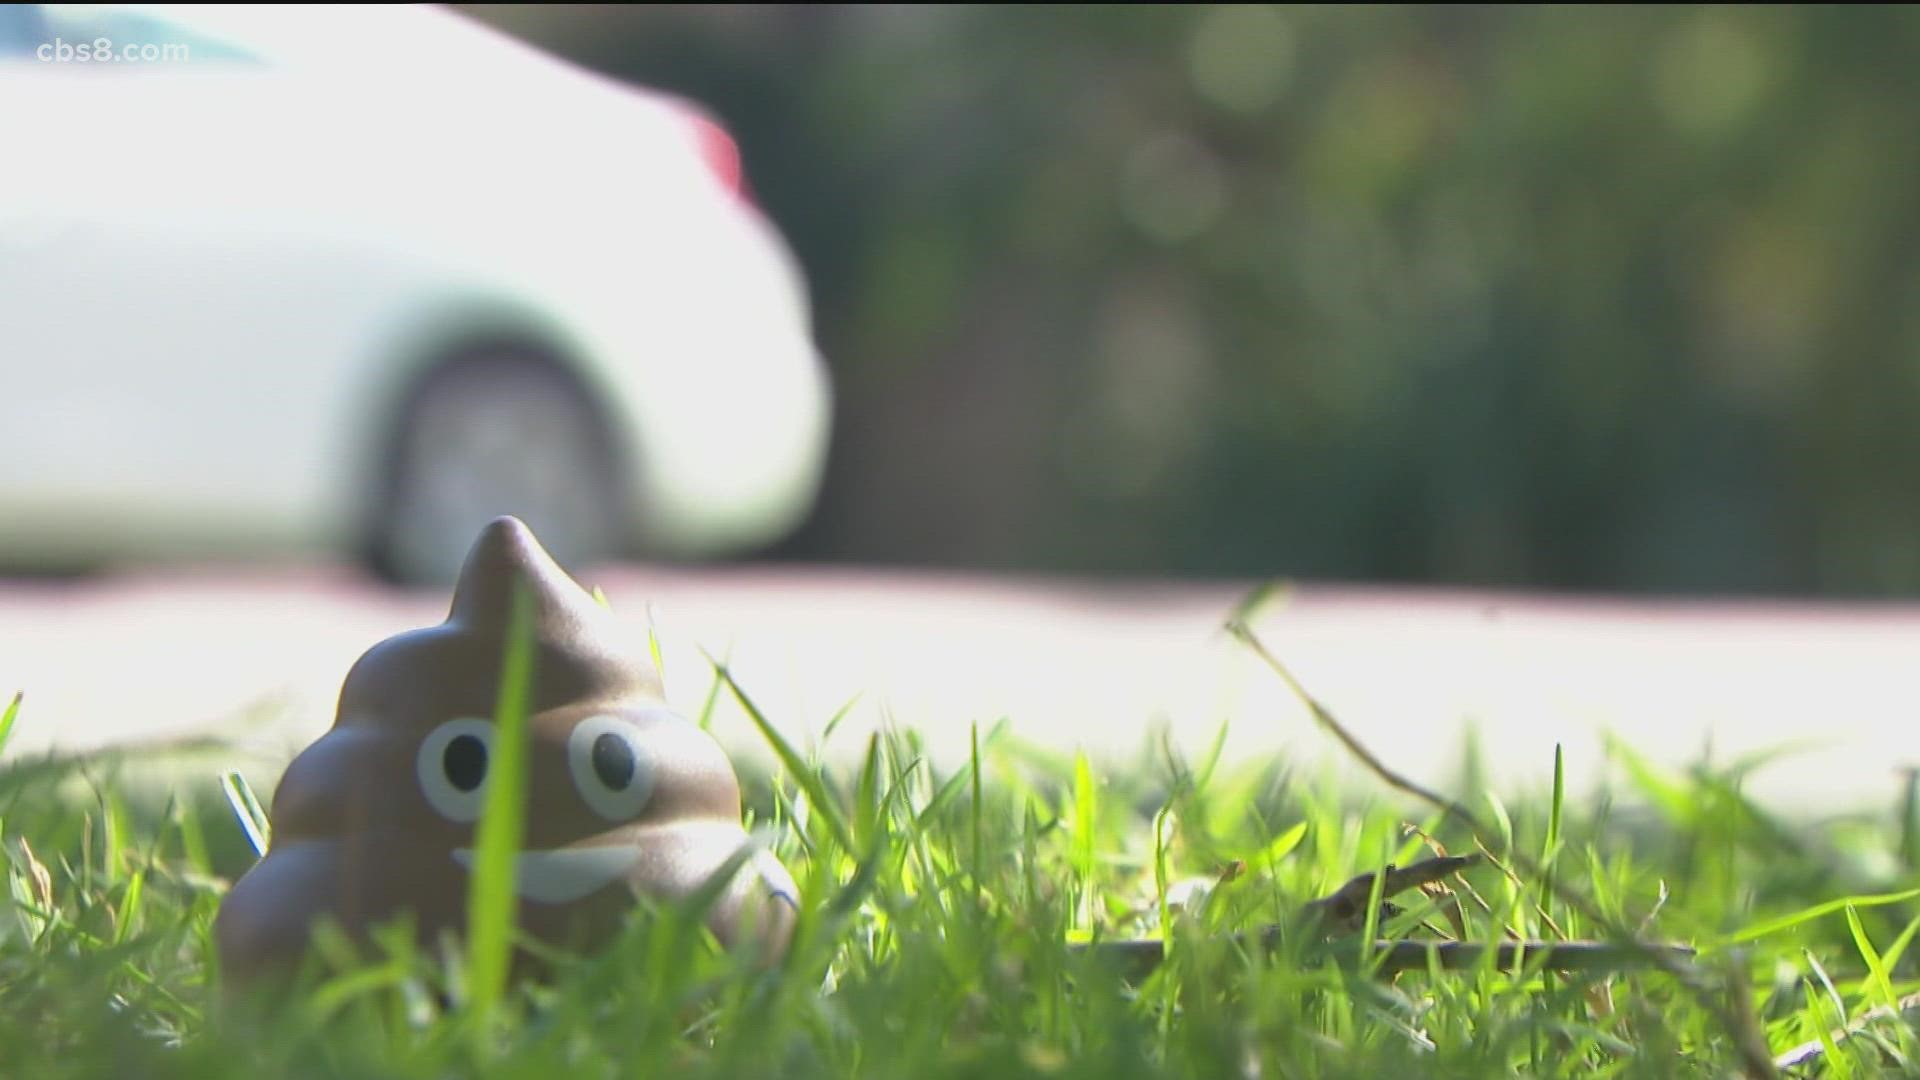 A local bioscience company is accepting donations of your dog's poop for medical research.